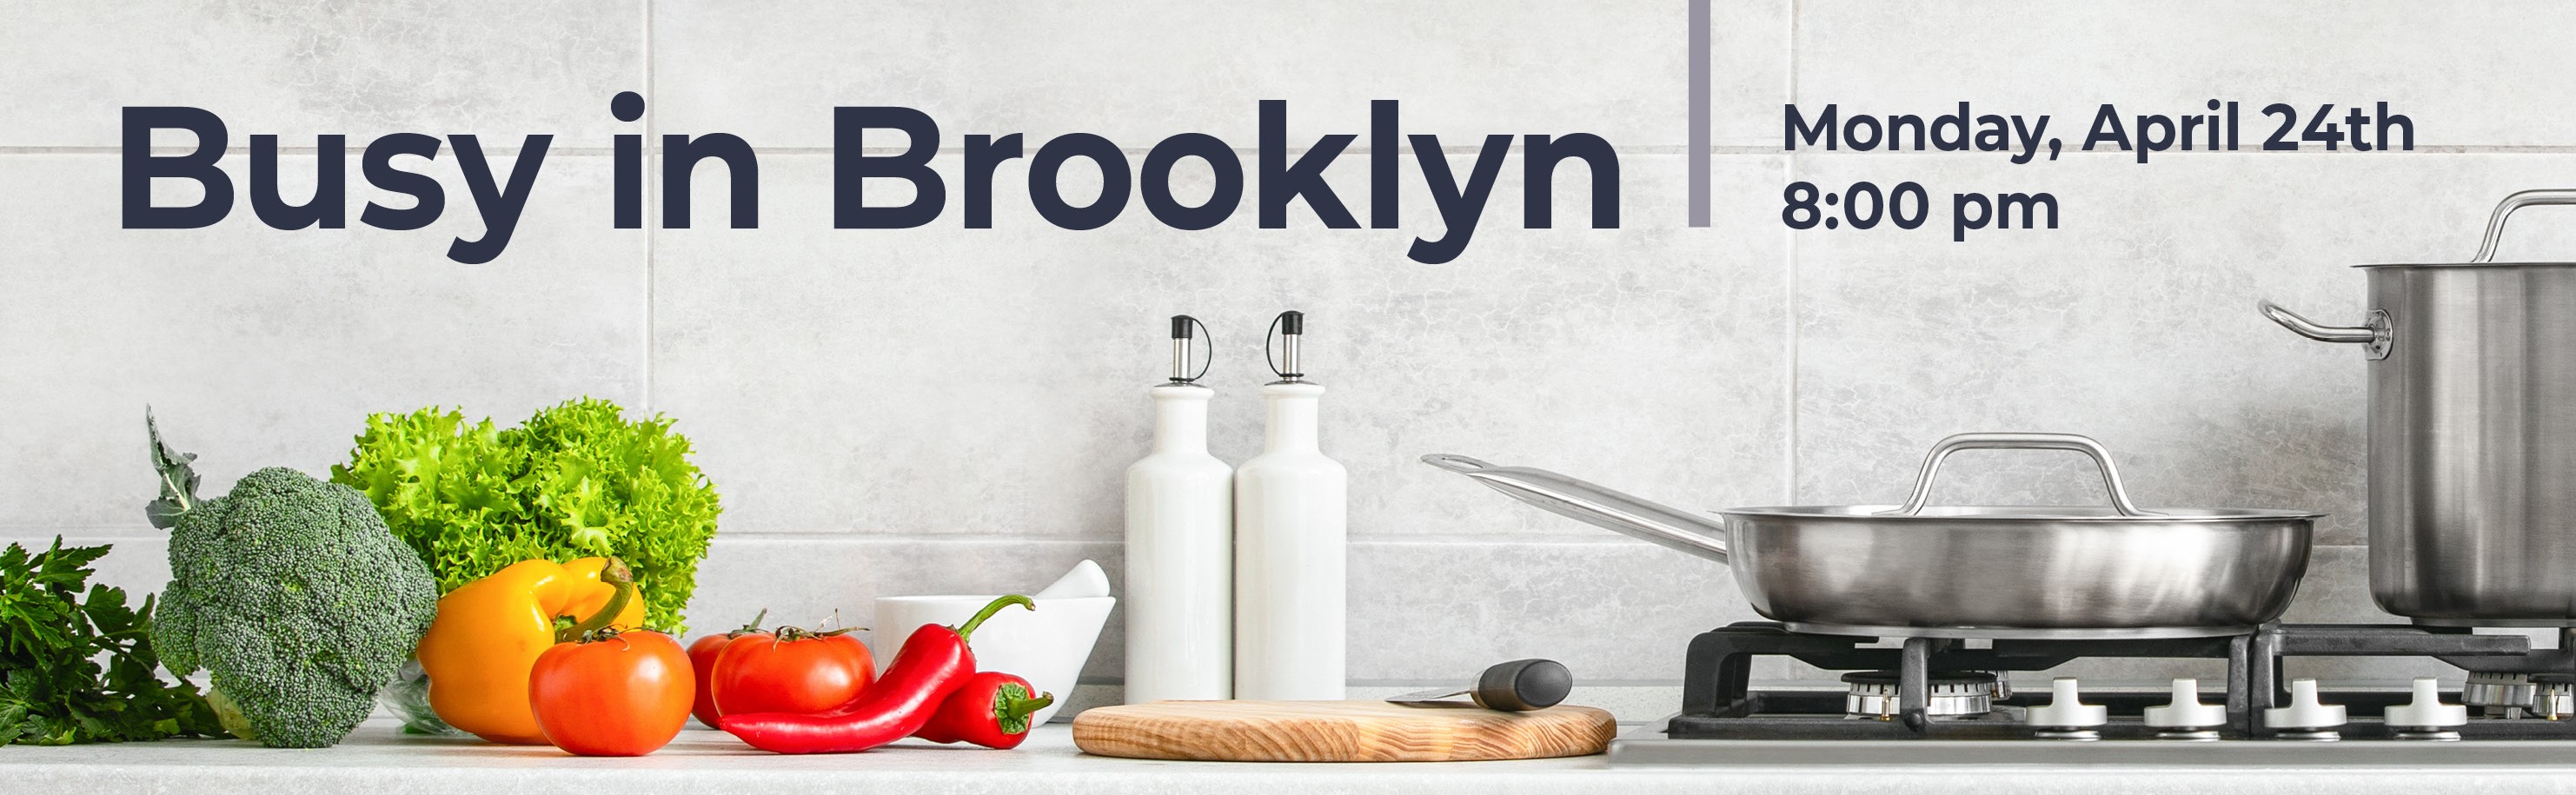 Cooking Demo and Q&A with Busy In Brooklyn